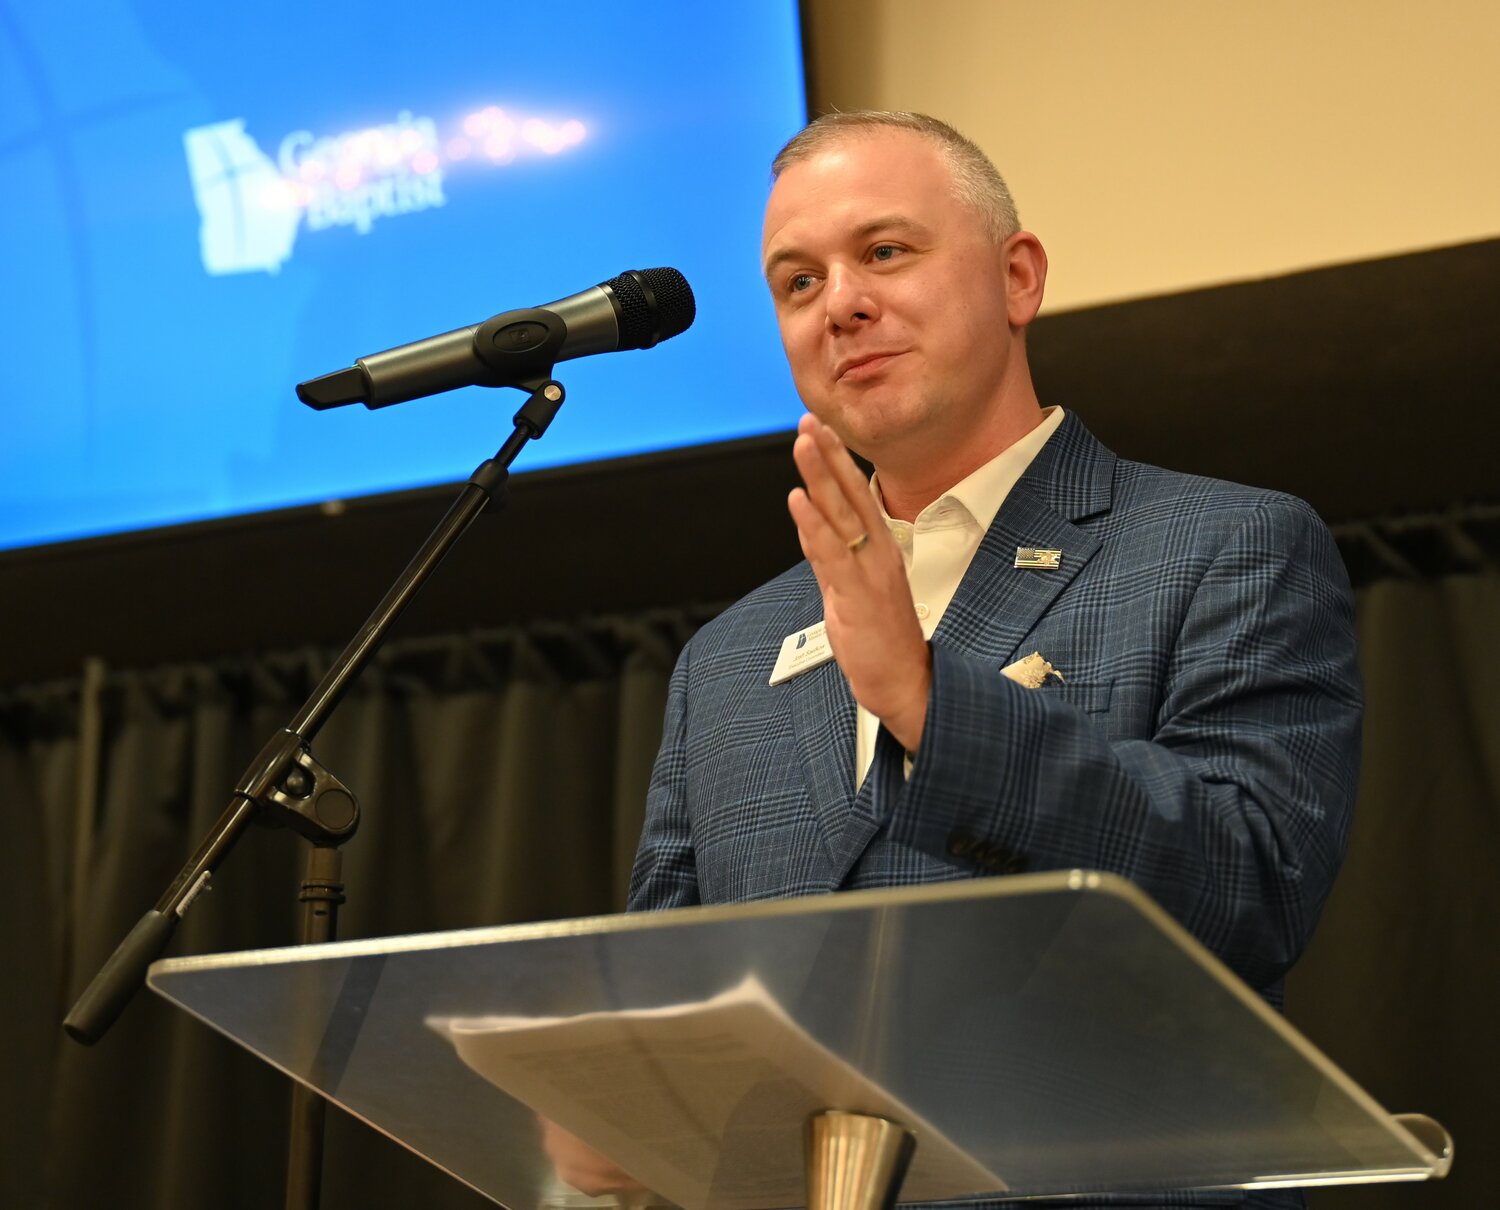 Josh Saefkow speaks to the Georgia Baptist Executive Committee in Fayetteville.